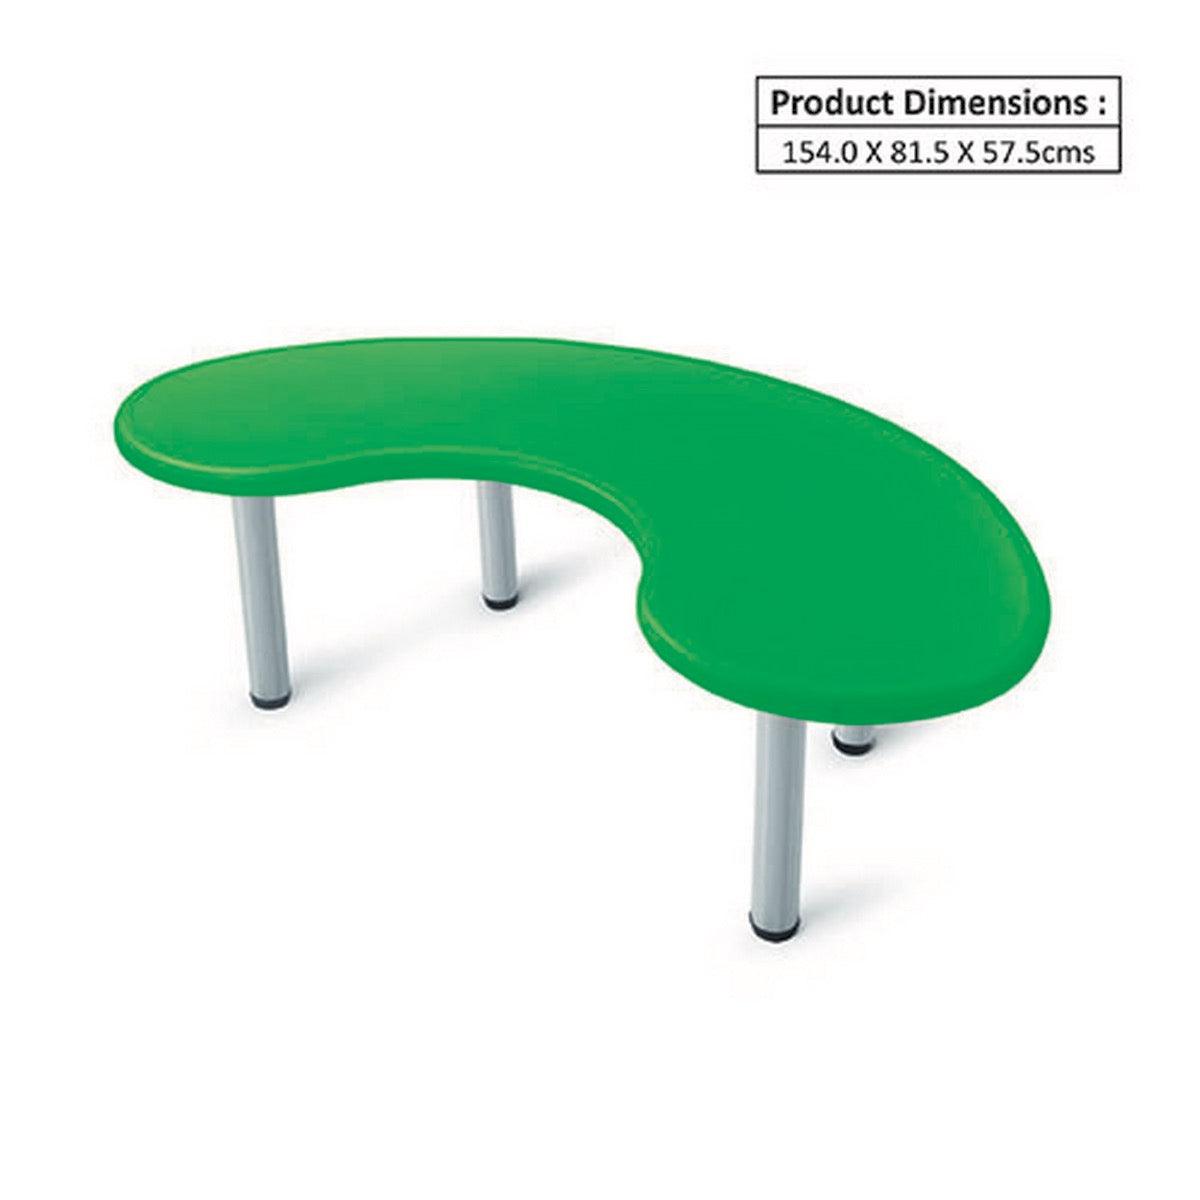 Ok Play Moon Desk Big, Round And Smooth Edges For Safety, Perfect For Home And School, Green, 2 to 4 Years